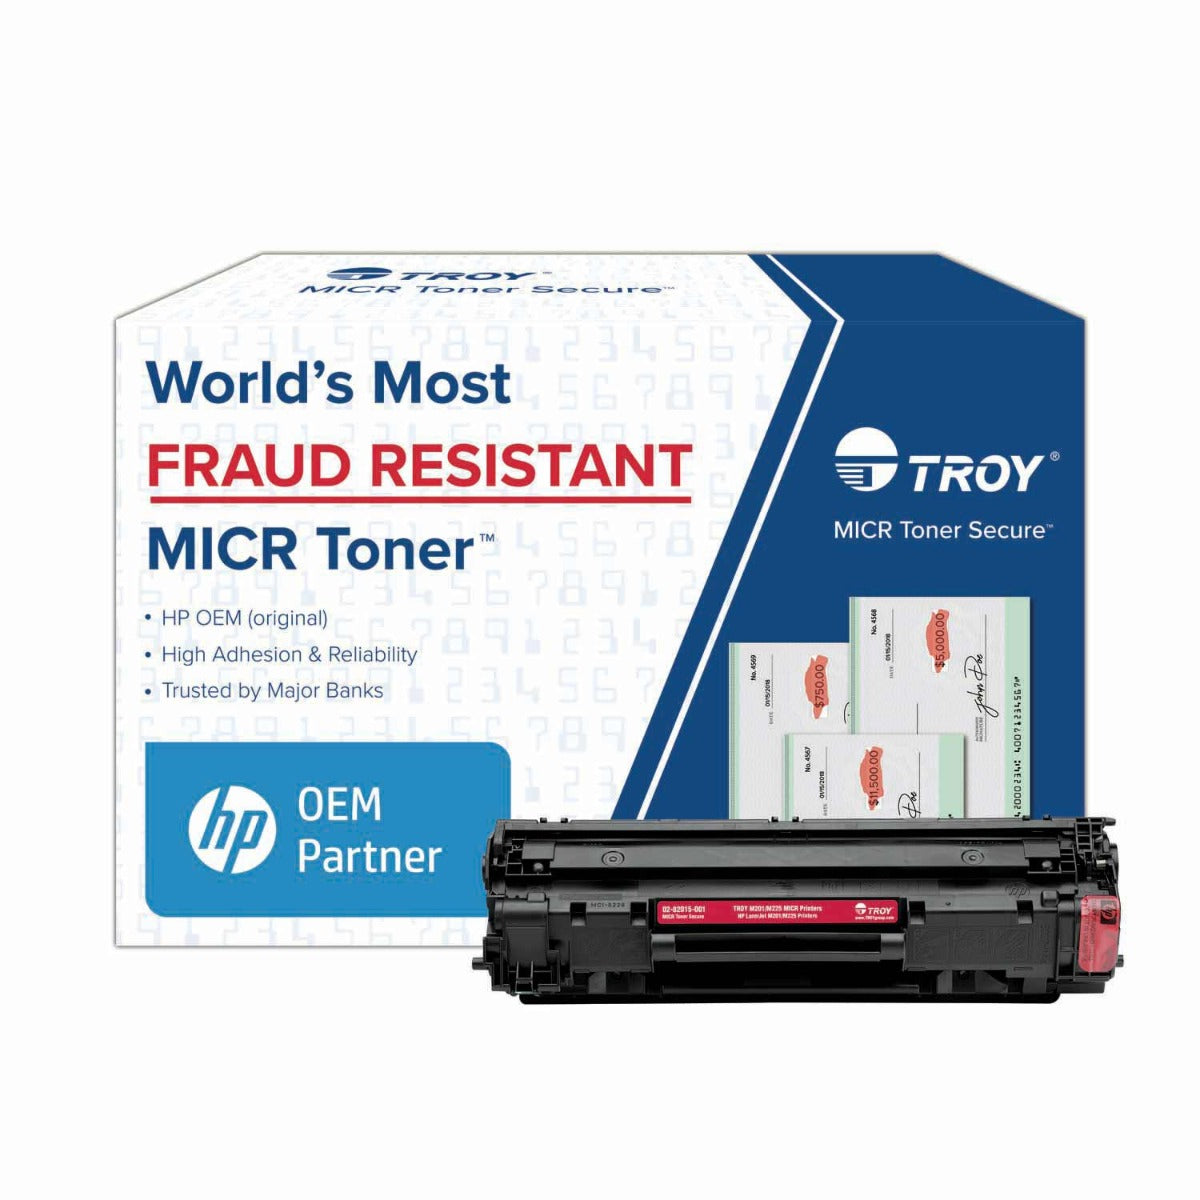 TROY M201/M225 MICR Toner Secure Standard Yield Cartridge (Coordinating HP Part Number: CF283A)